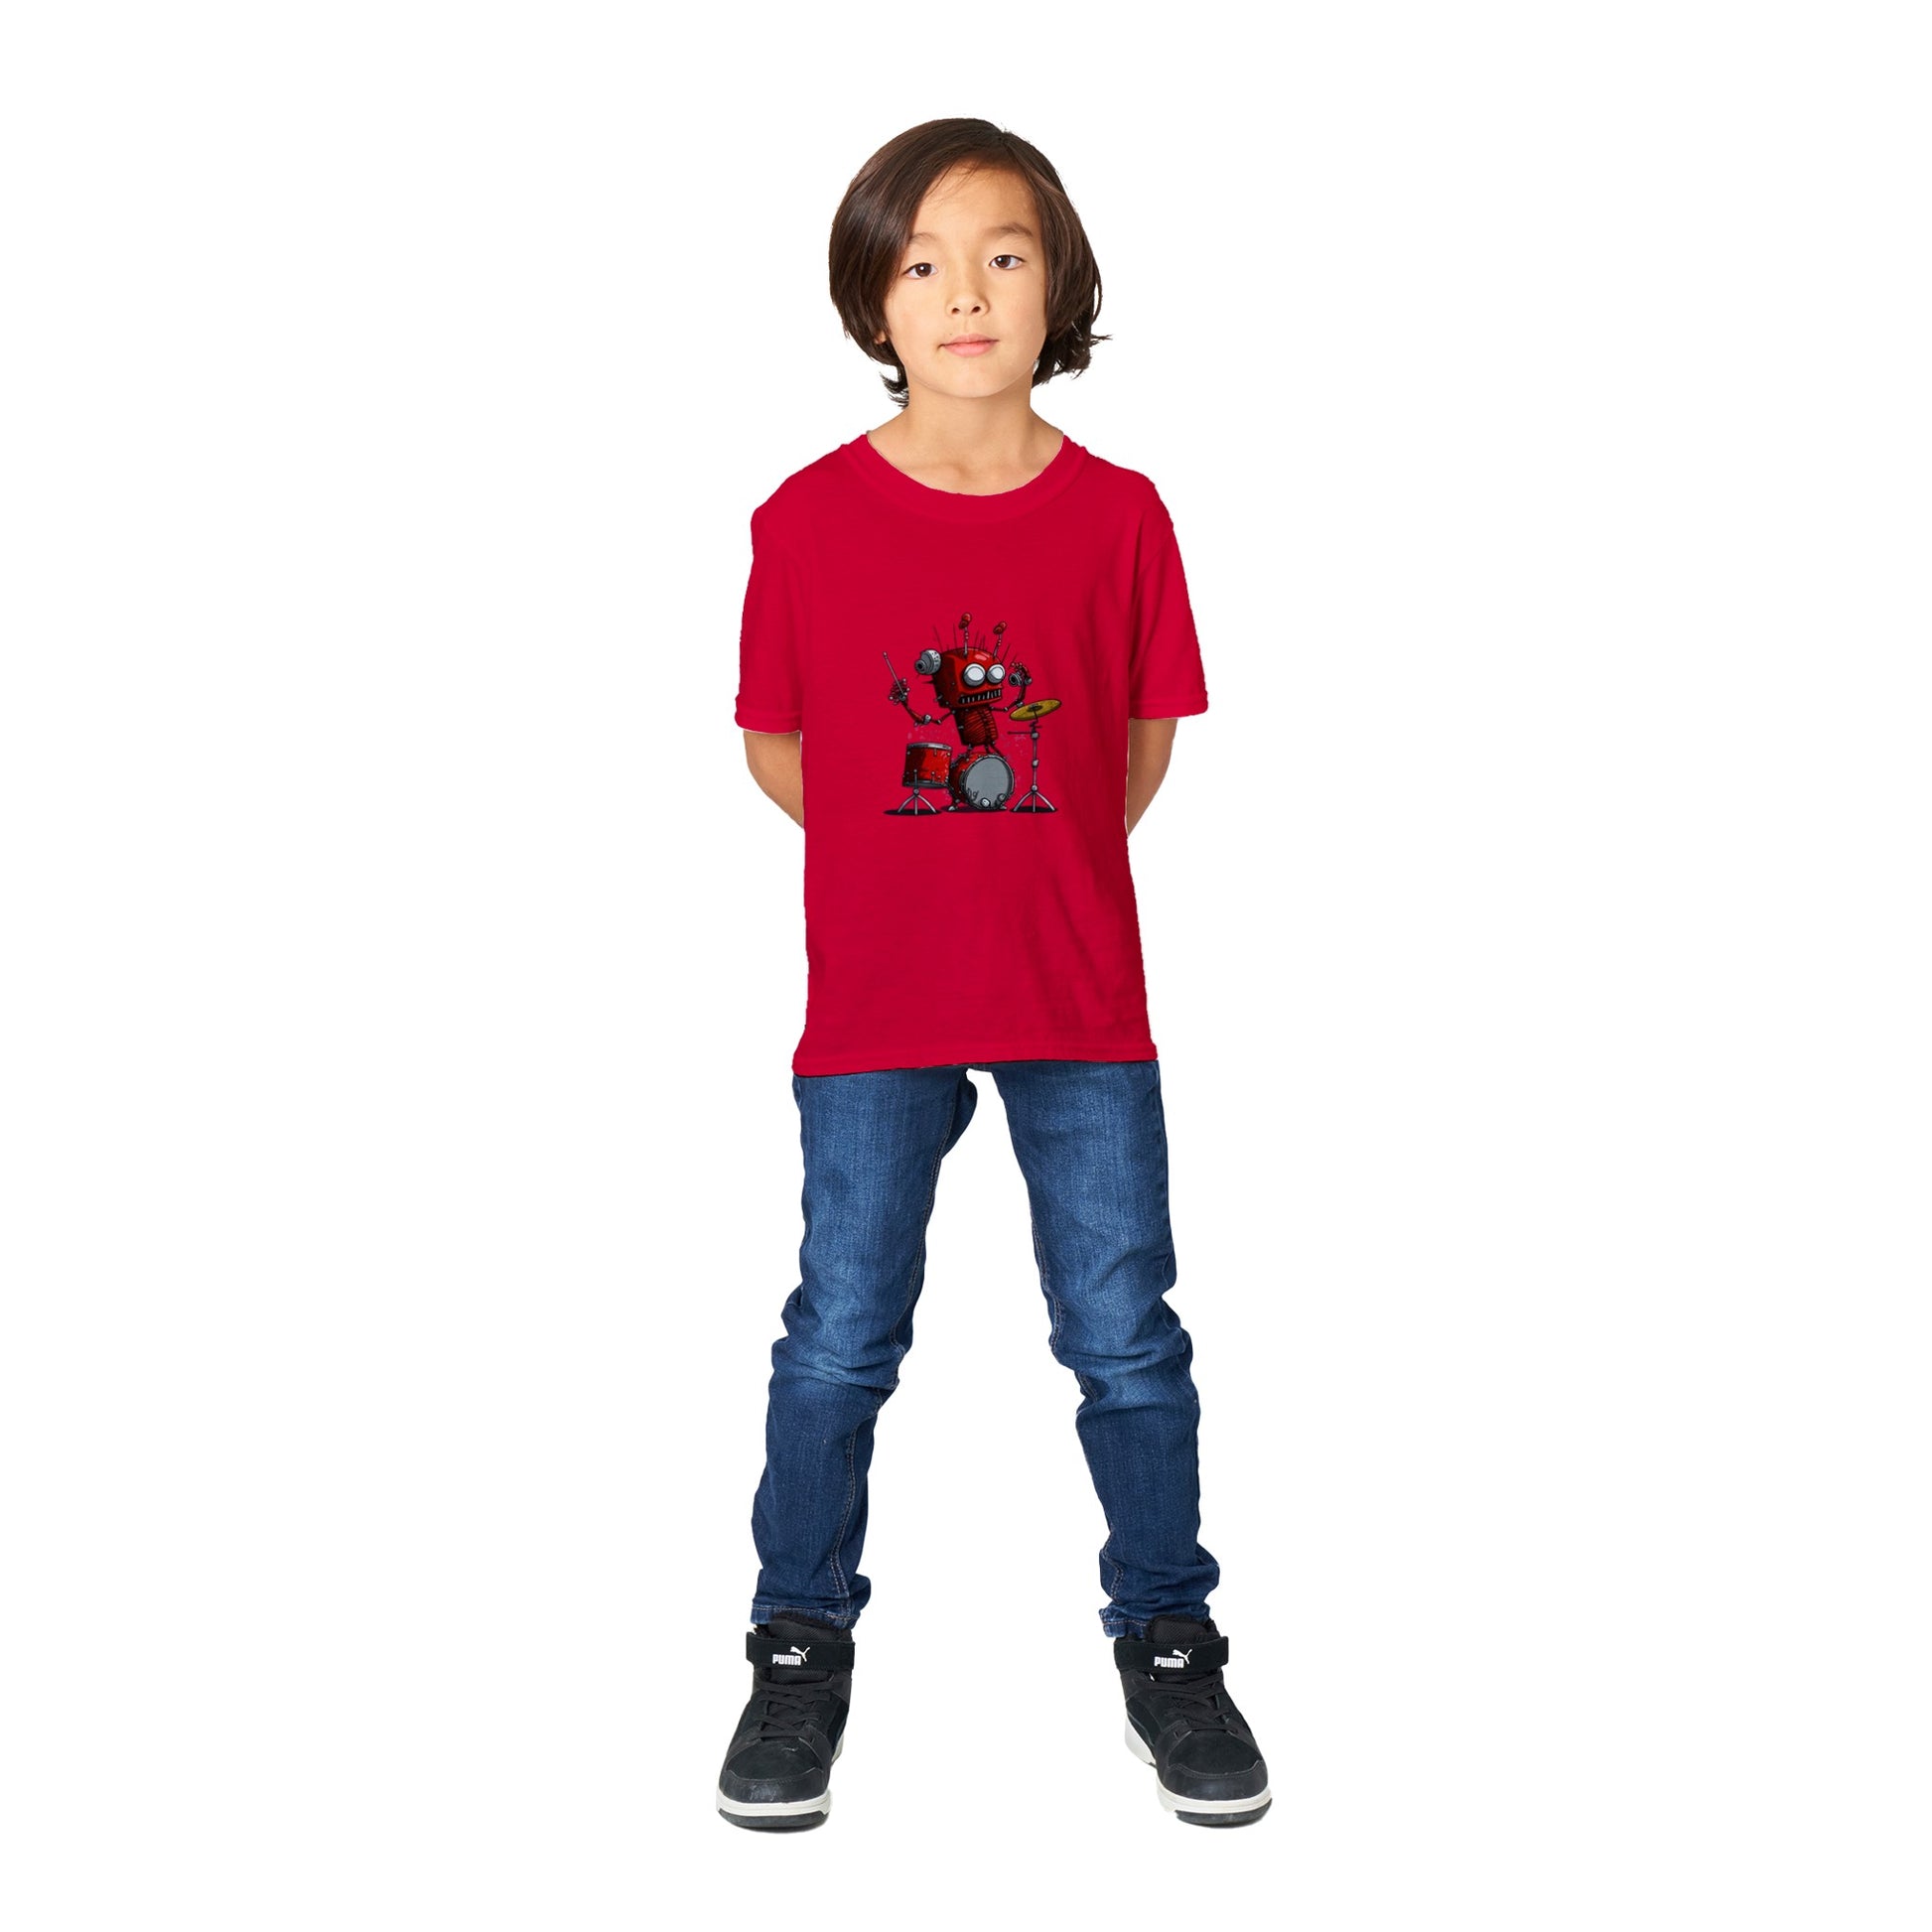 Kid wearing a red t-shirt with crazy robot playing the drums